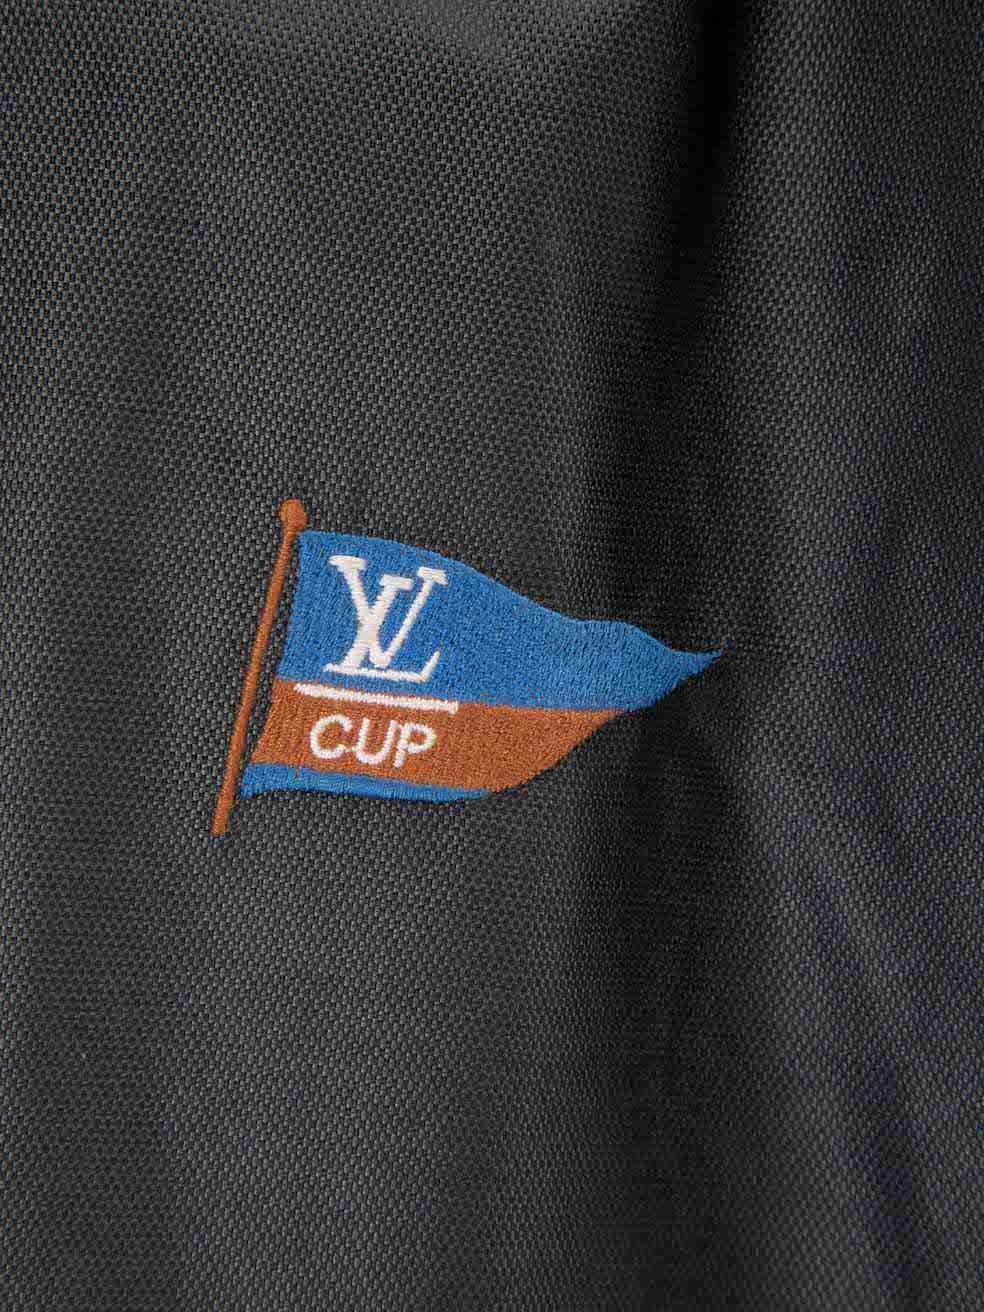 Women's Louis Vuitton Black LV Cup Embroidered Windbreaker Size L For Sale